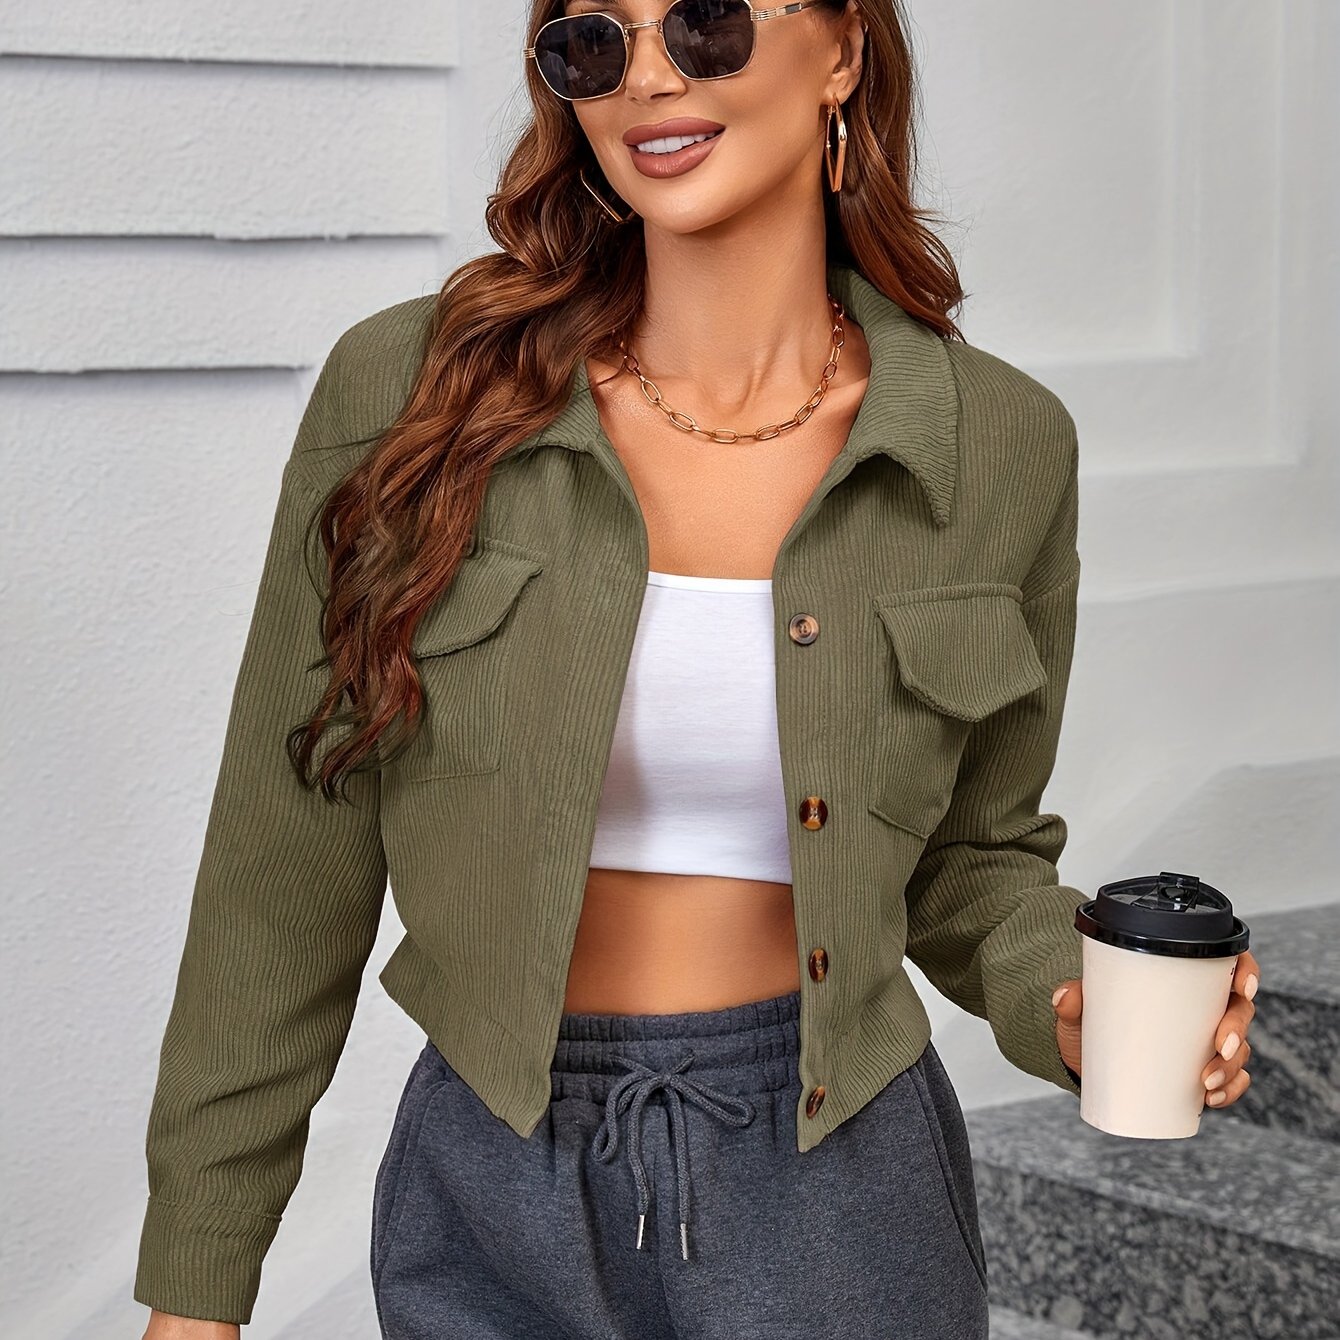 Vzyzv Corduroy Button Front Jacket, Casual Long Sleeve Outwear For Fall & Winter, Women's Clothing